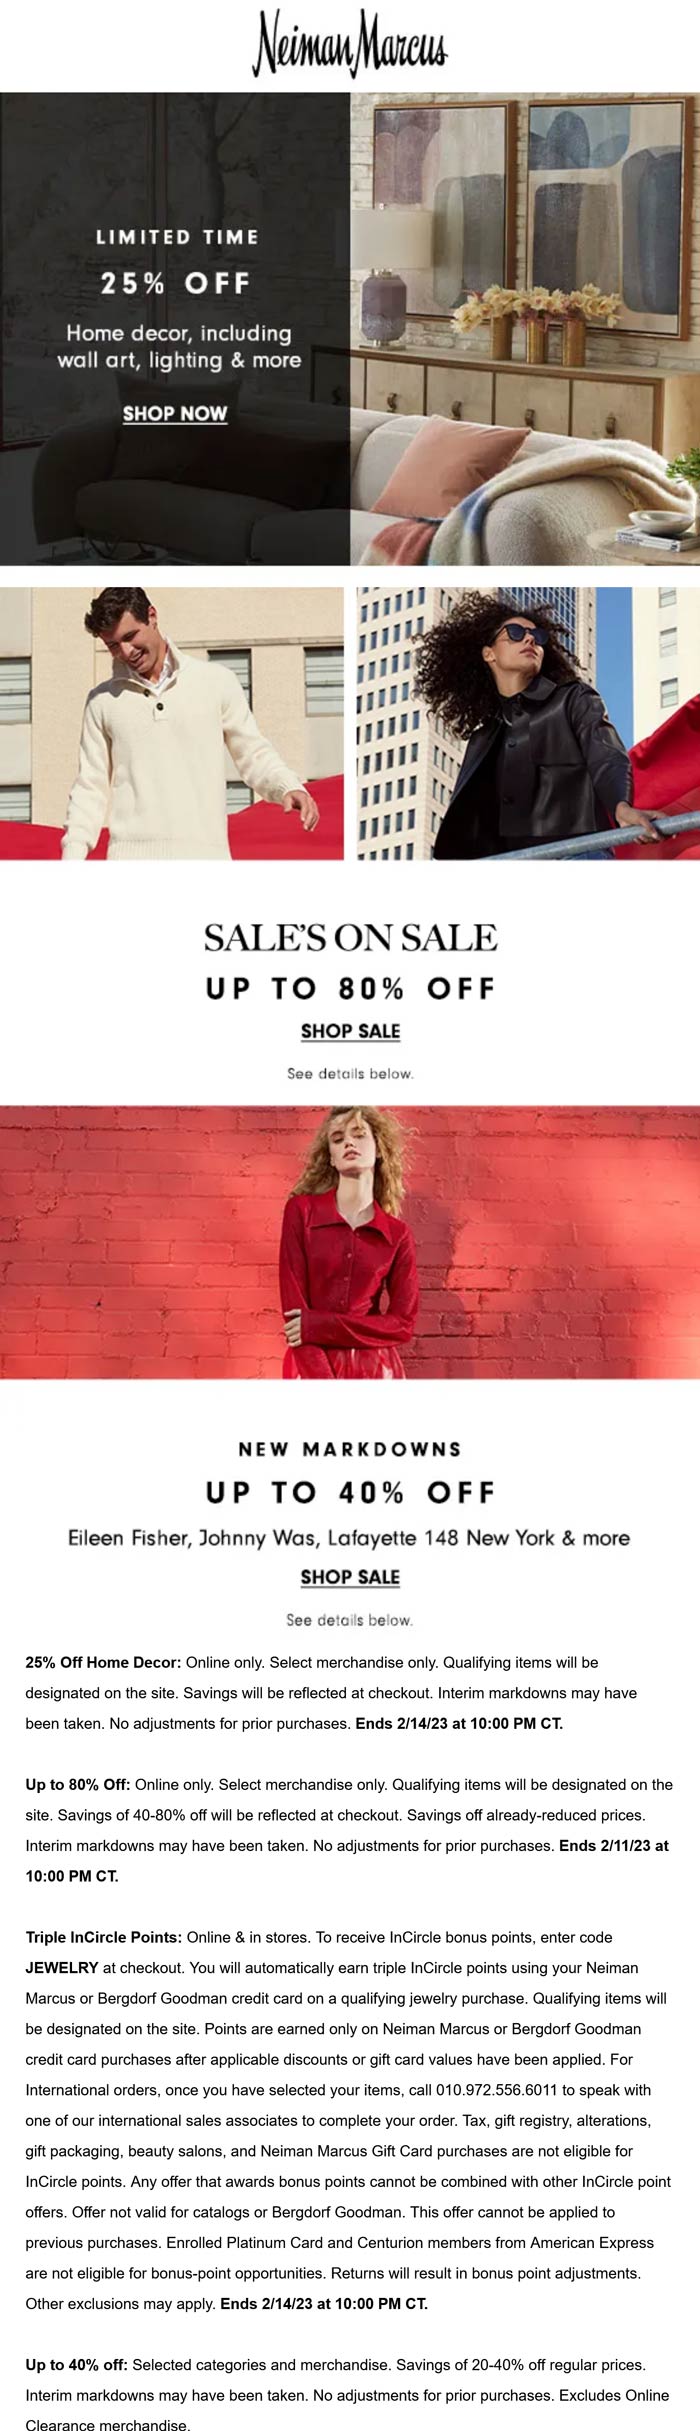 Neiman Marcus stores Coupon  25% off home decor online at Neiman Marcus #neimanmarcus 